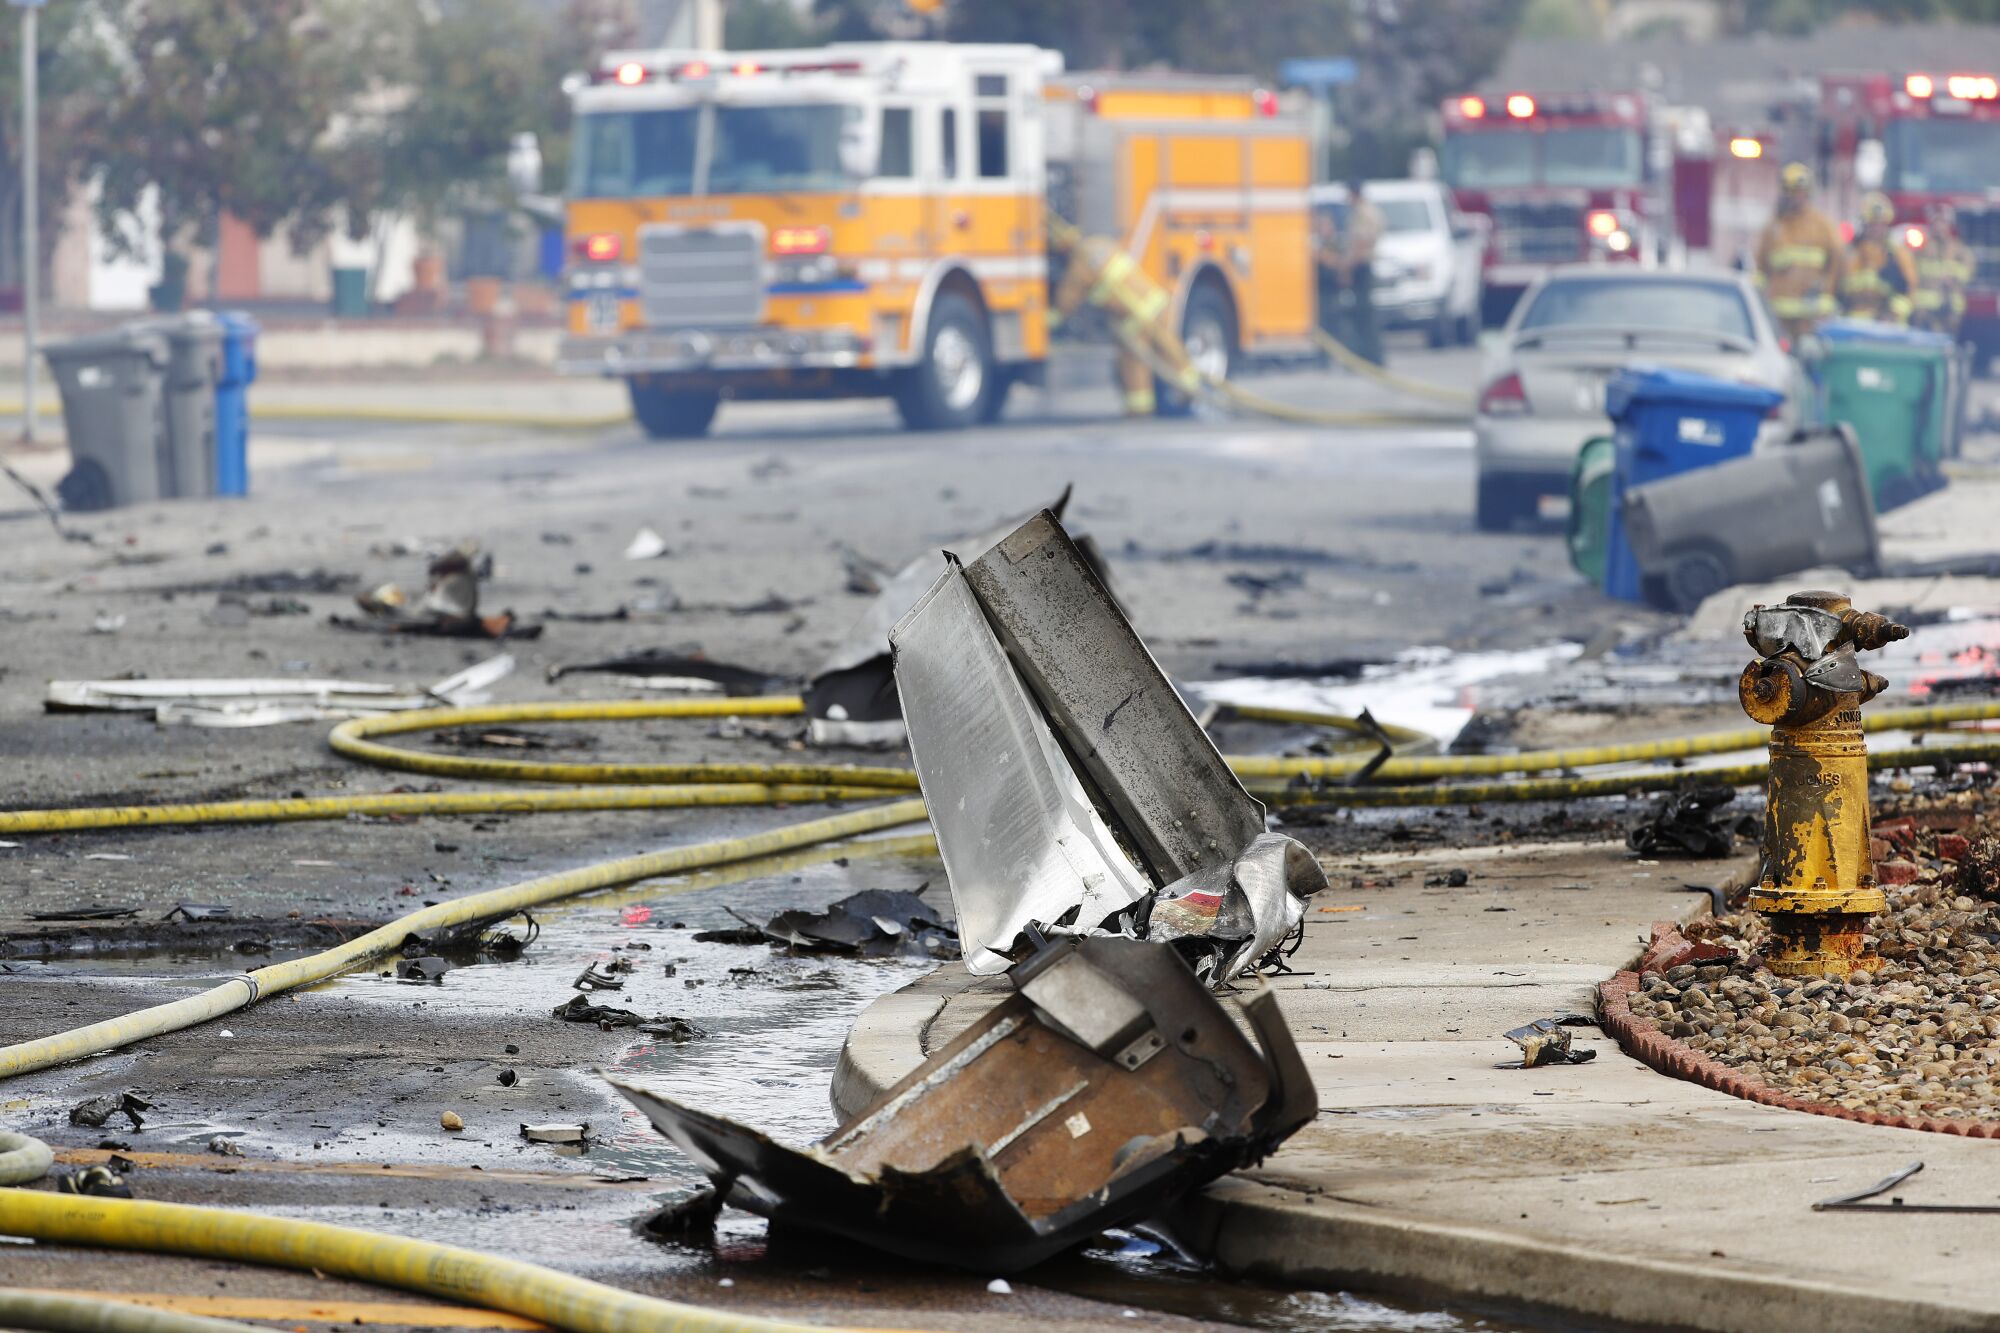 Debris covers the street at the scene of a fatal plane crash on Monday, Oct. 11, 2021 in Santee, CA.